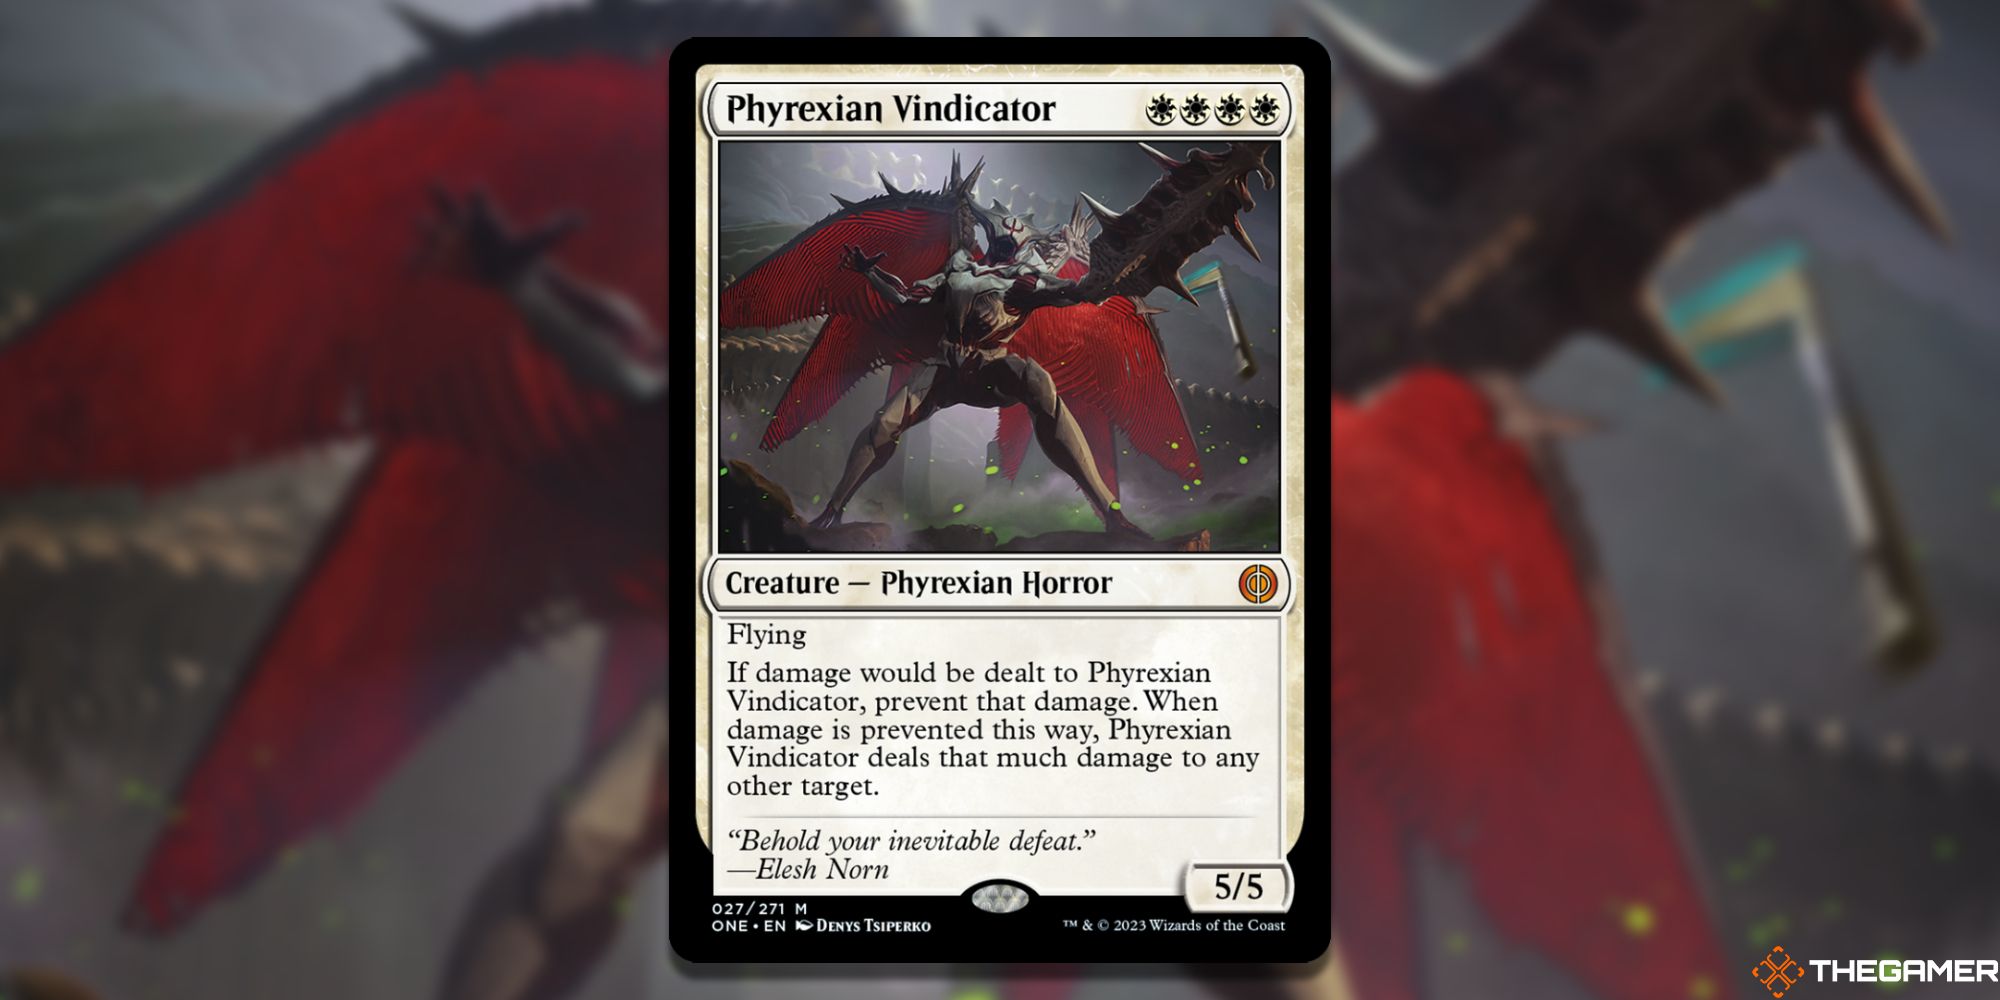 Image of the Phyrexian Vindicator card in Magic: The Gathering, with art by Denys Tsiperko